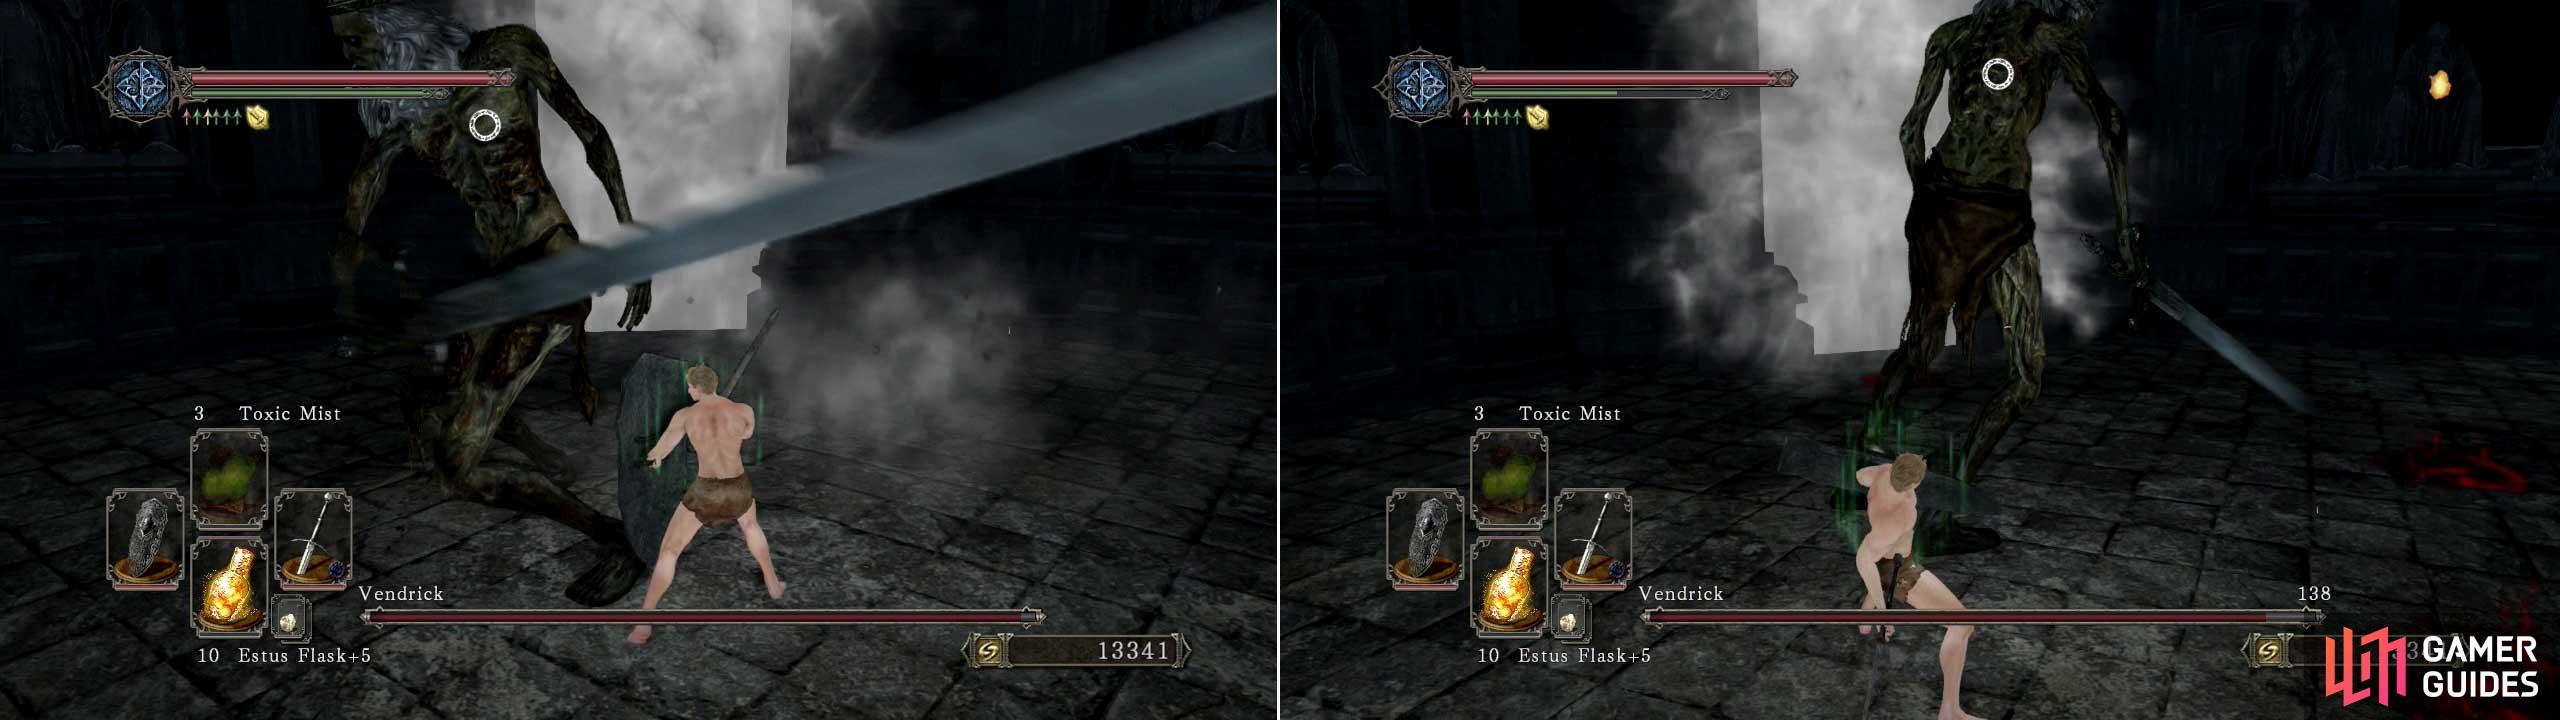 Using a massive Greatshield with loads of poise can prevent a one-hit kill; but you’ll suffer a massive loss in stamina with none left to dodge with if he attacks a second time.